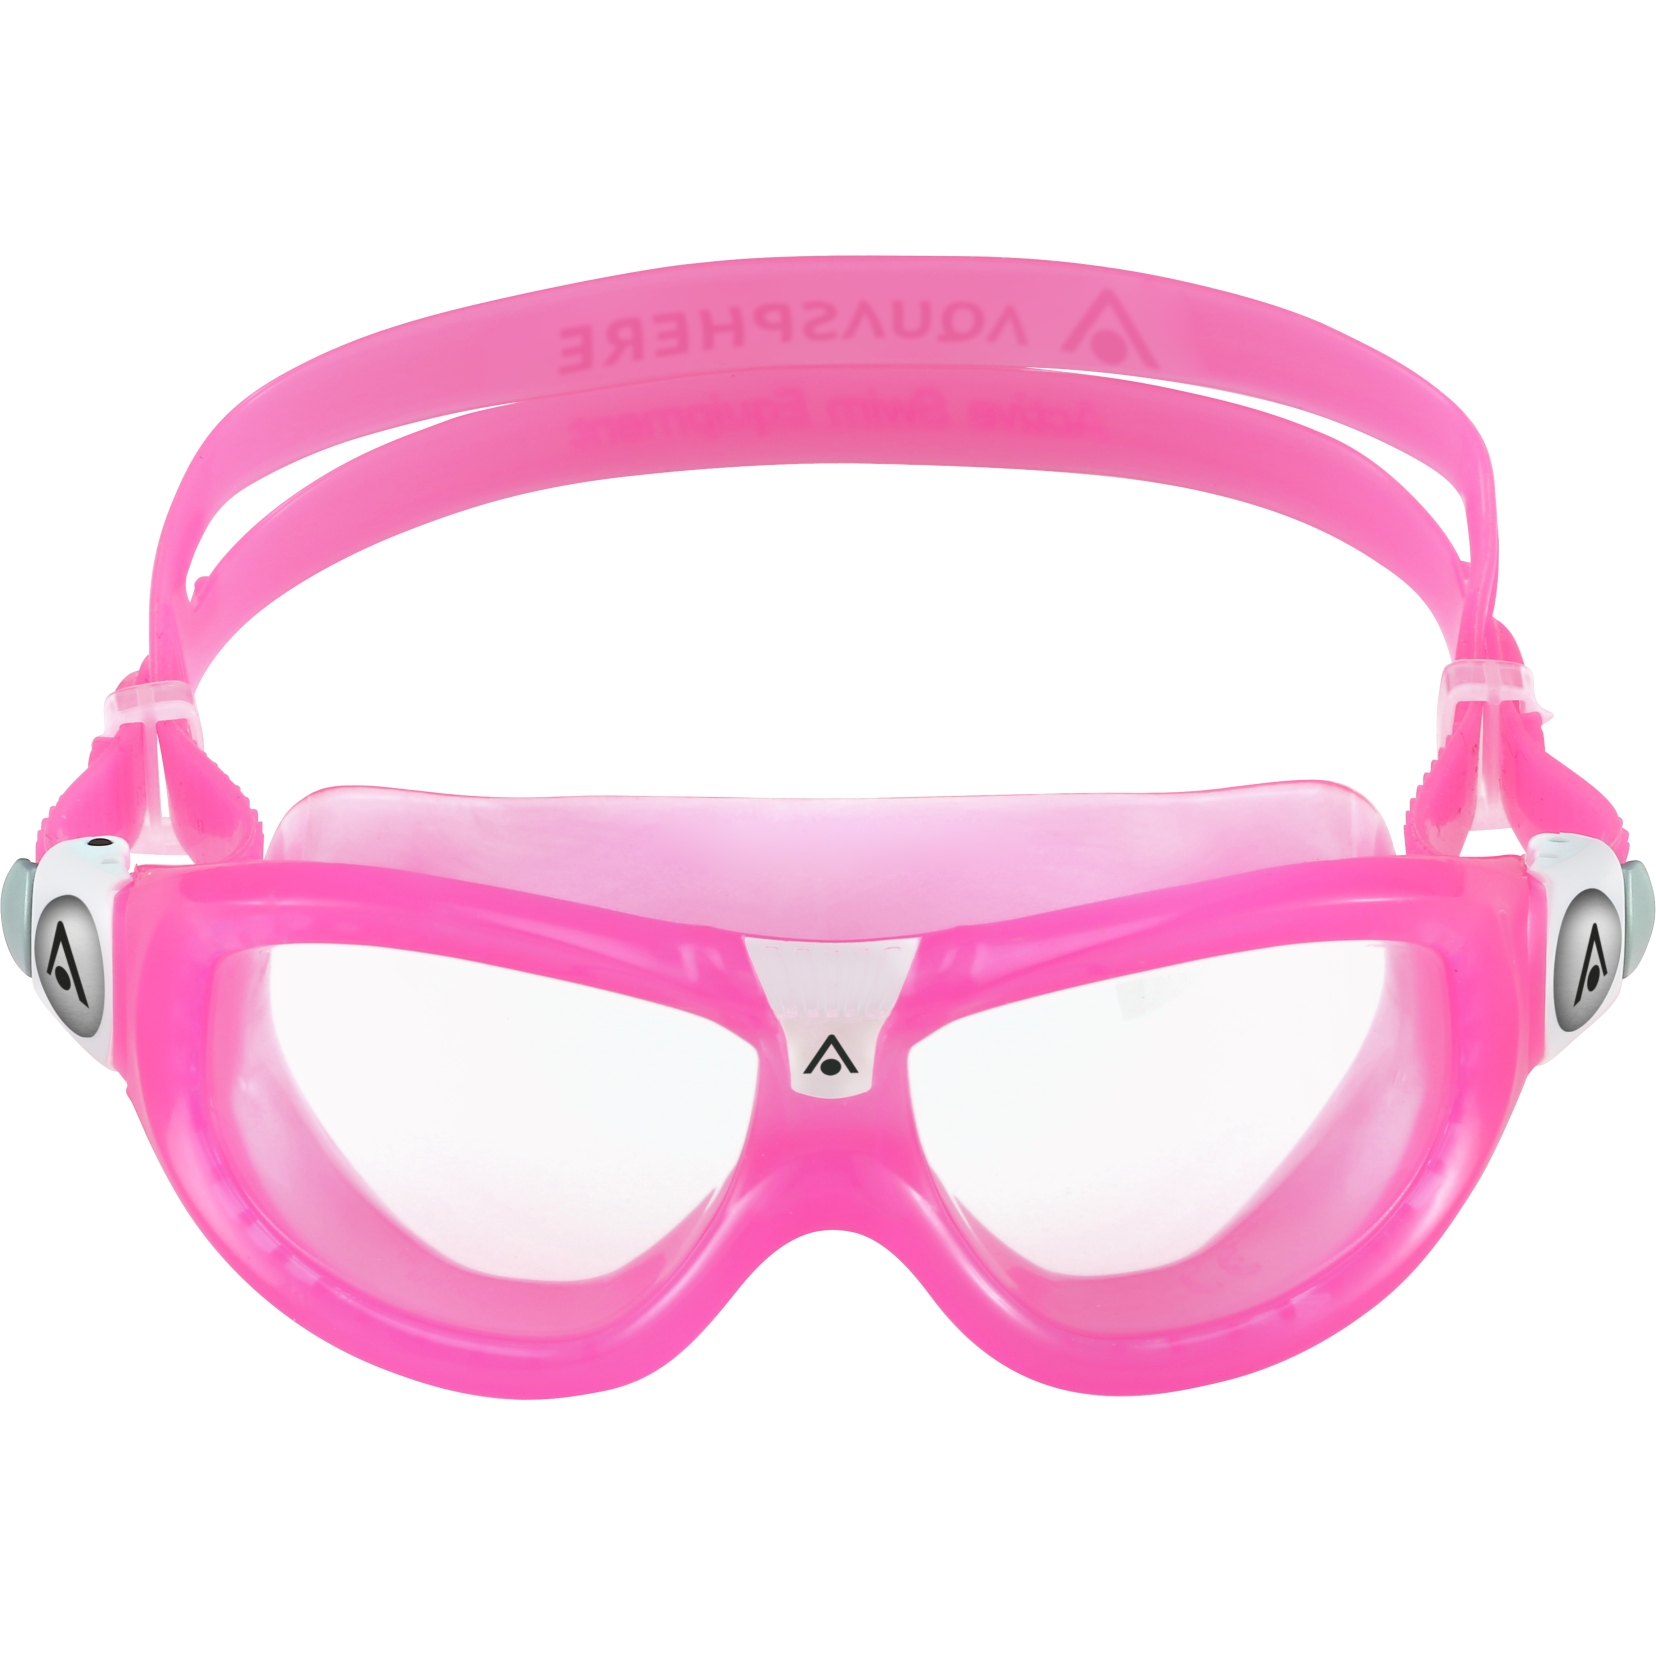 Picture of AQUASPHERE Seal Kid 2 Kids Swim Goggles - Clear - Pink/White